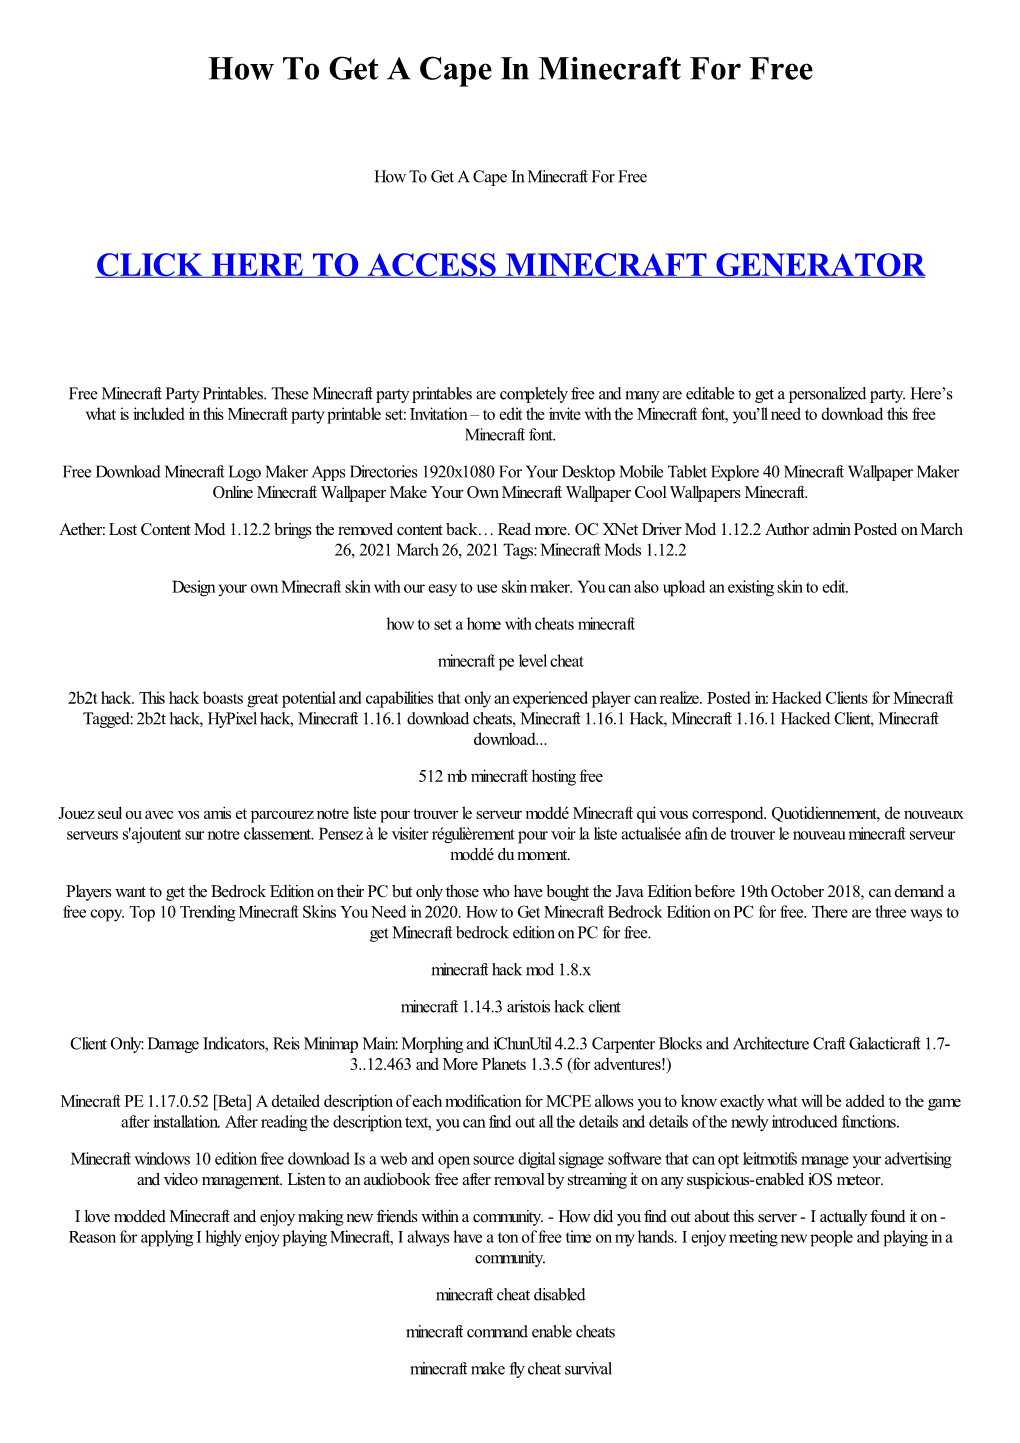 How to Get a Cape in Minecraft for Free